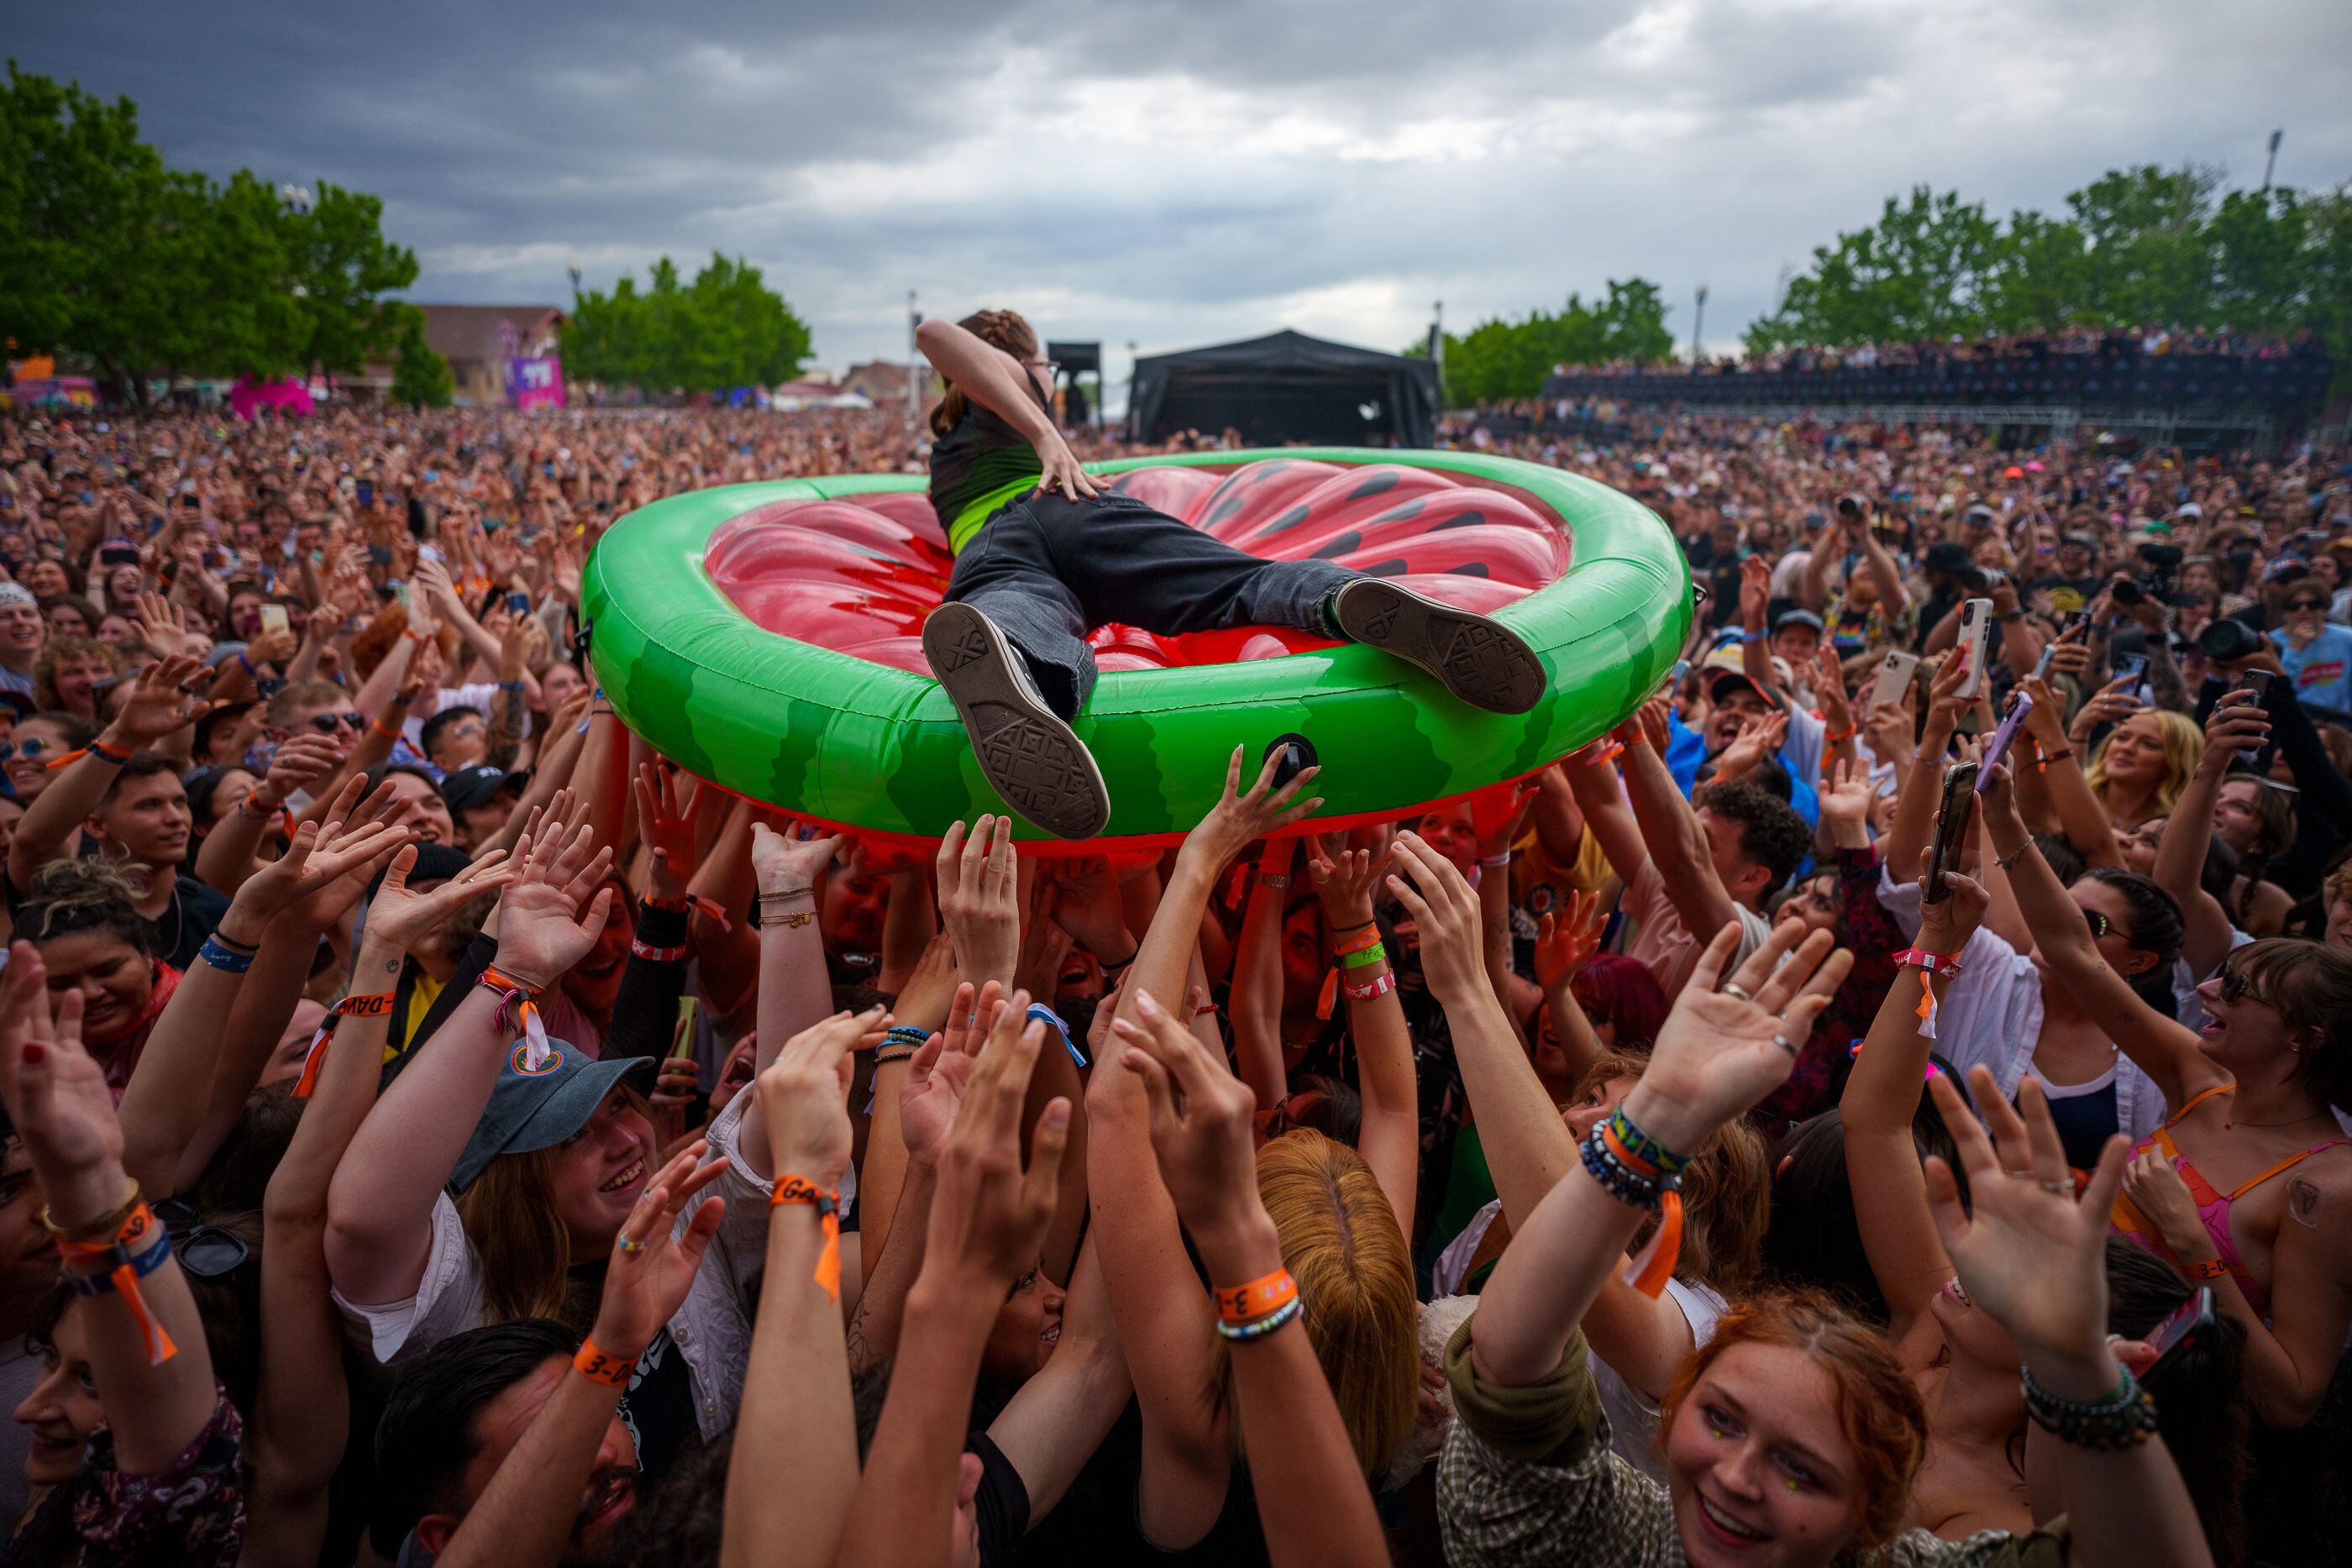 (Trent Nelson  |  The Salt Lake Tribune) A fan surfs the crowd as Goth Babe performs at Kilby Court Block Party in Salt Lake City on Saturday, May 13, 2023.